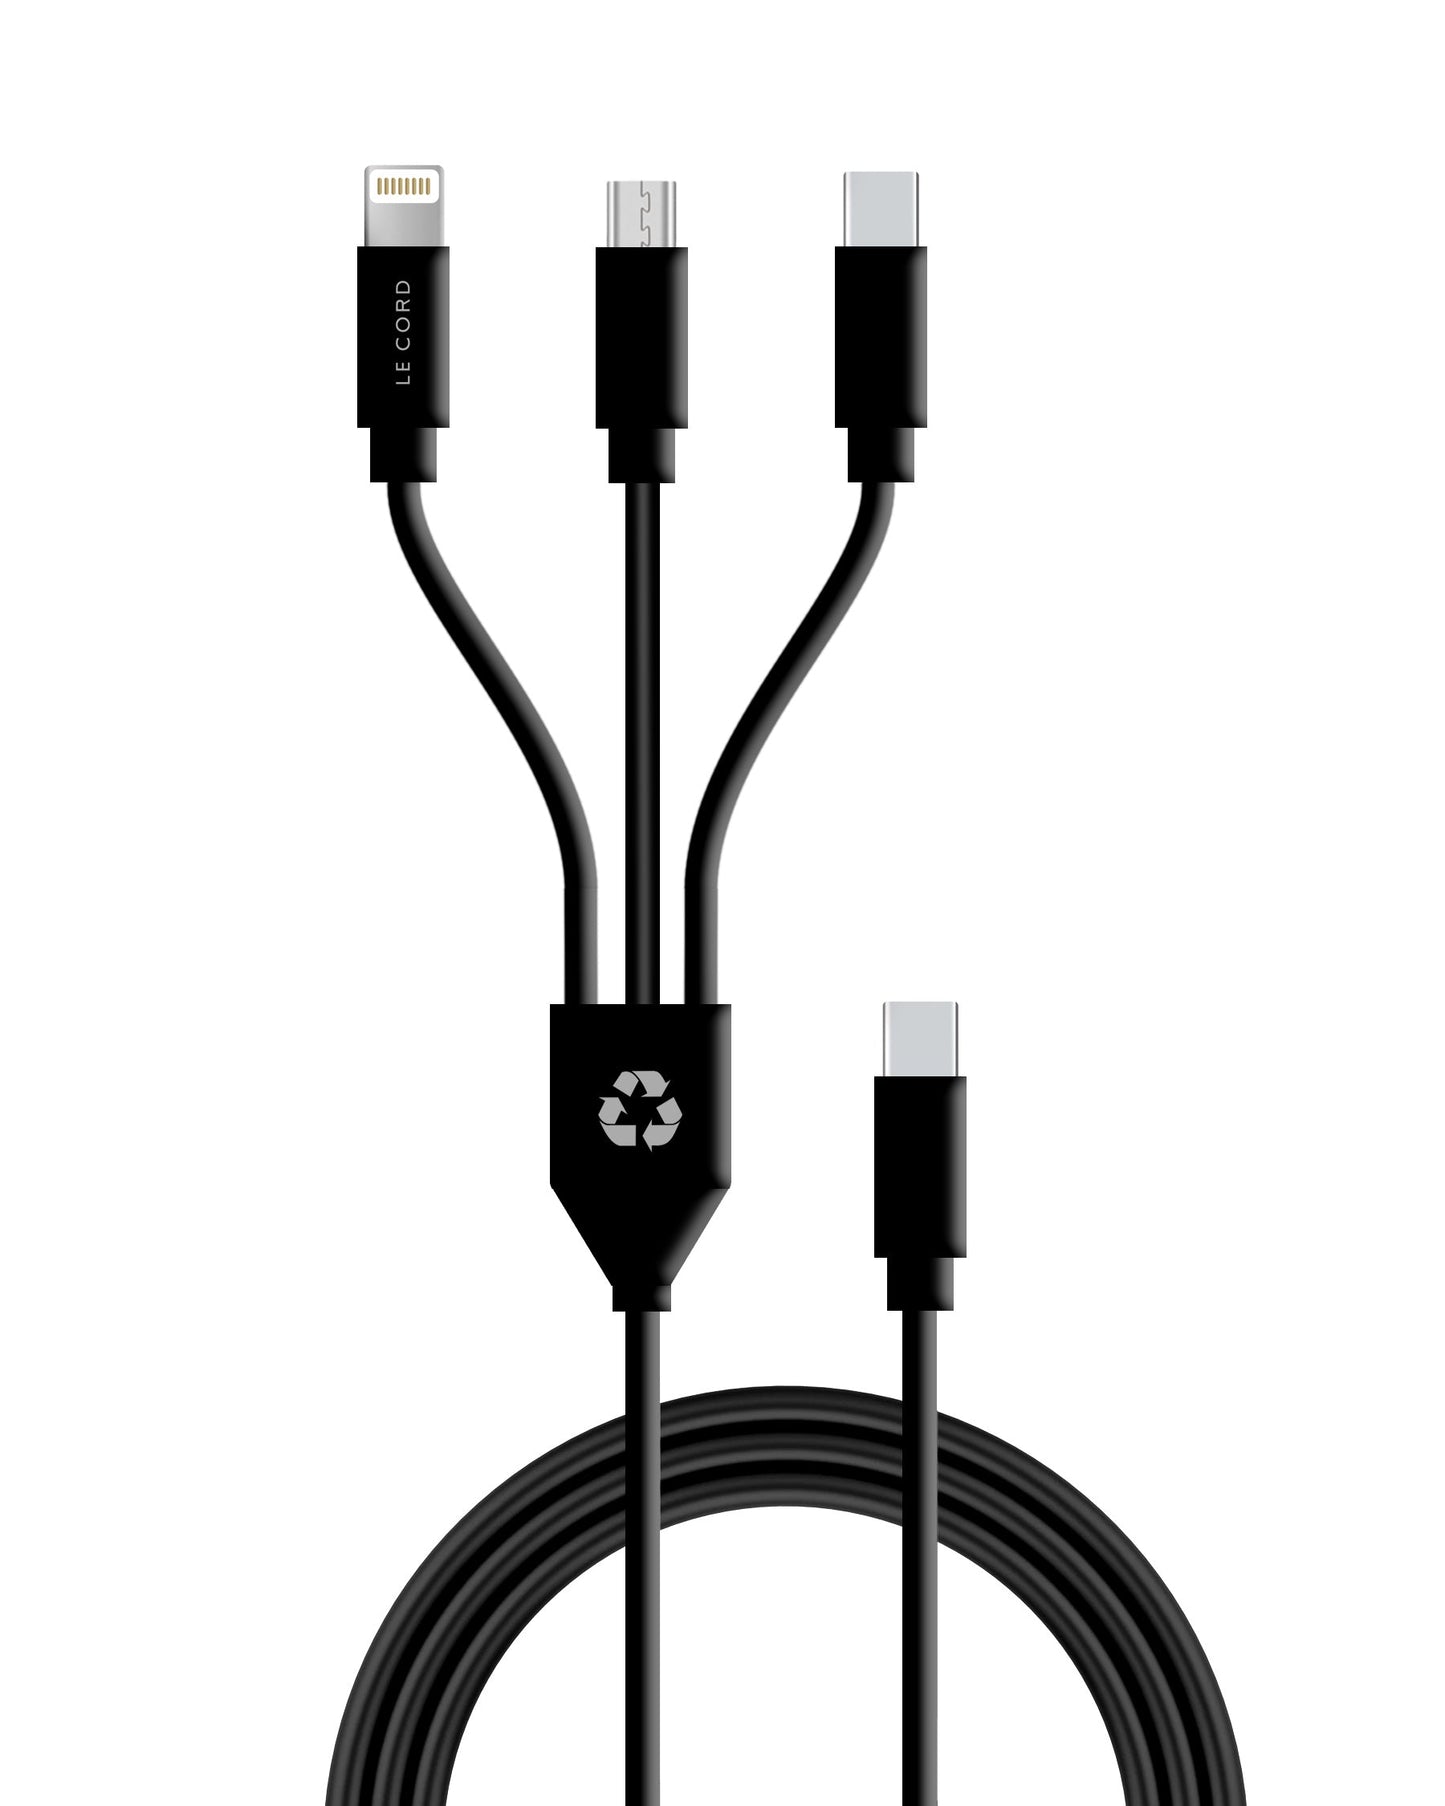 3 in 1 multi cable USB-C - Made of recycled plastics